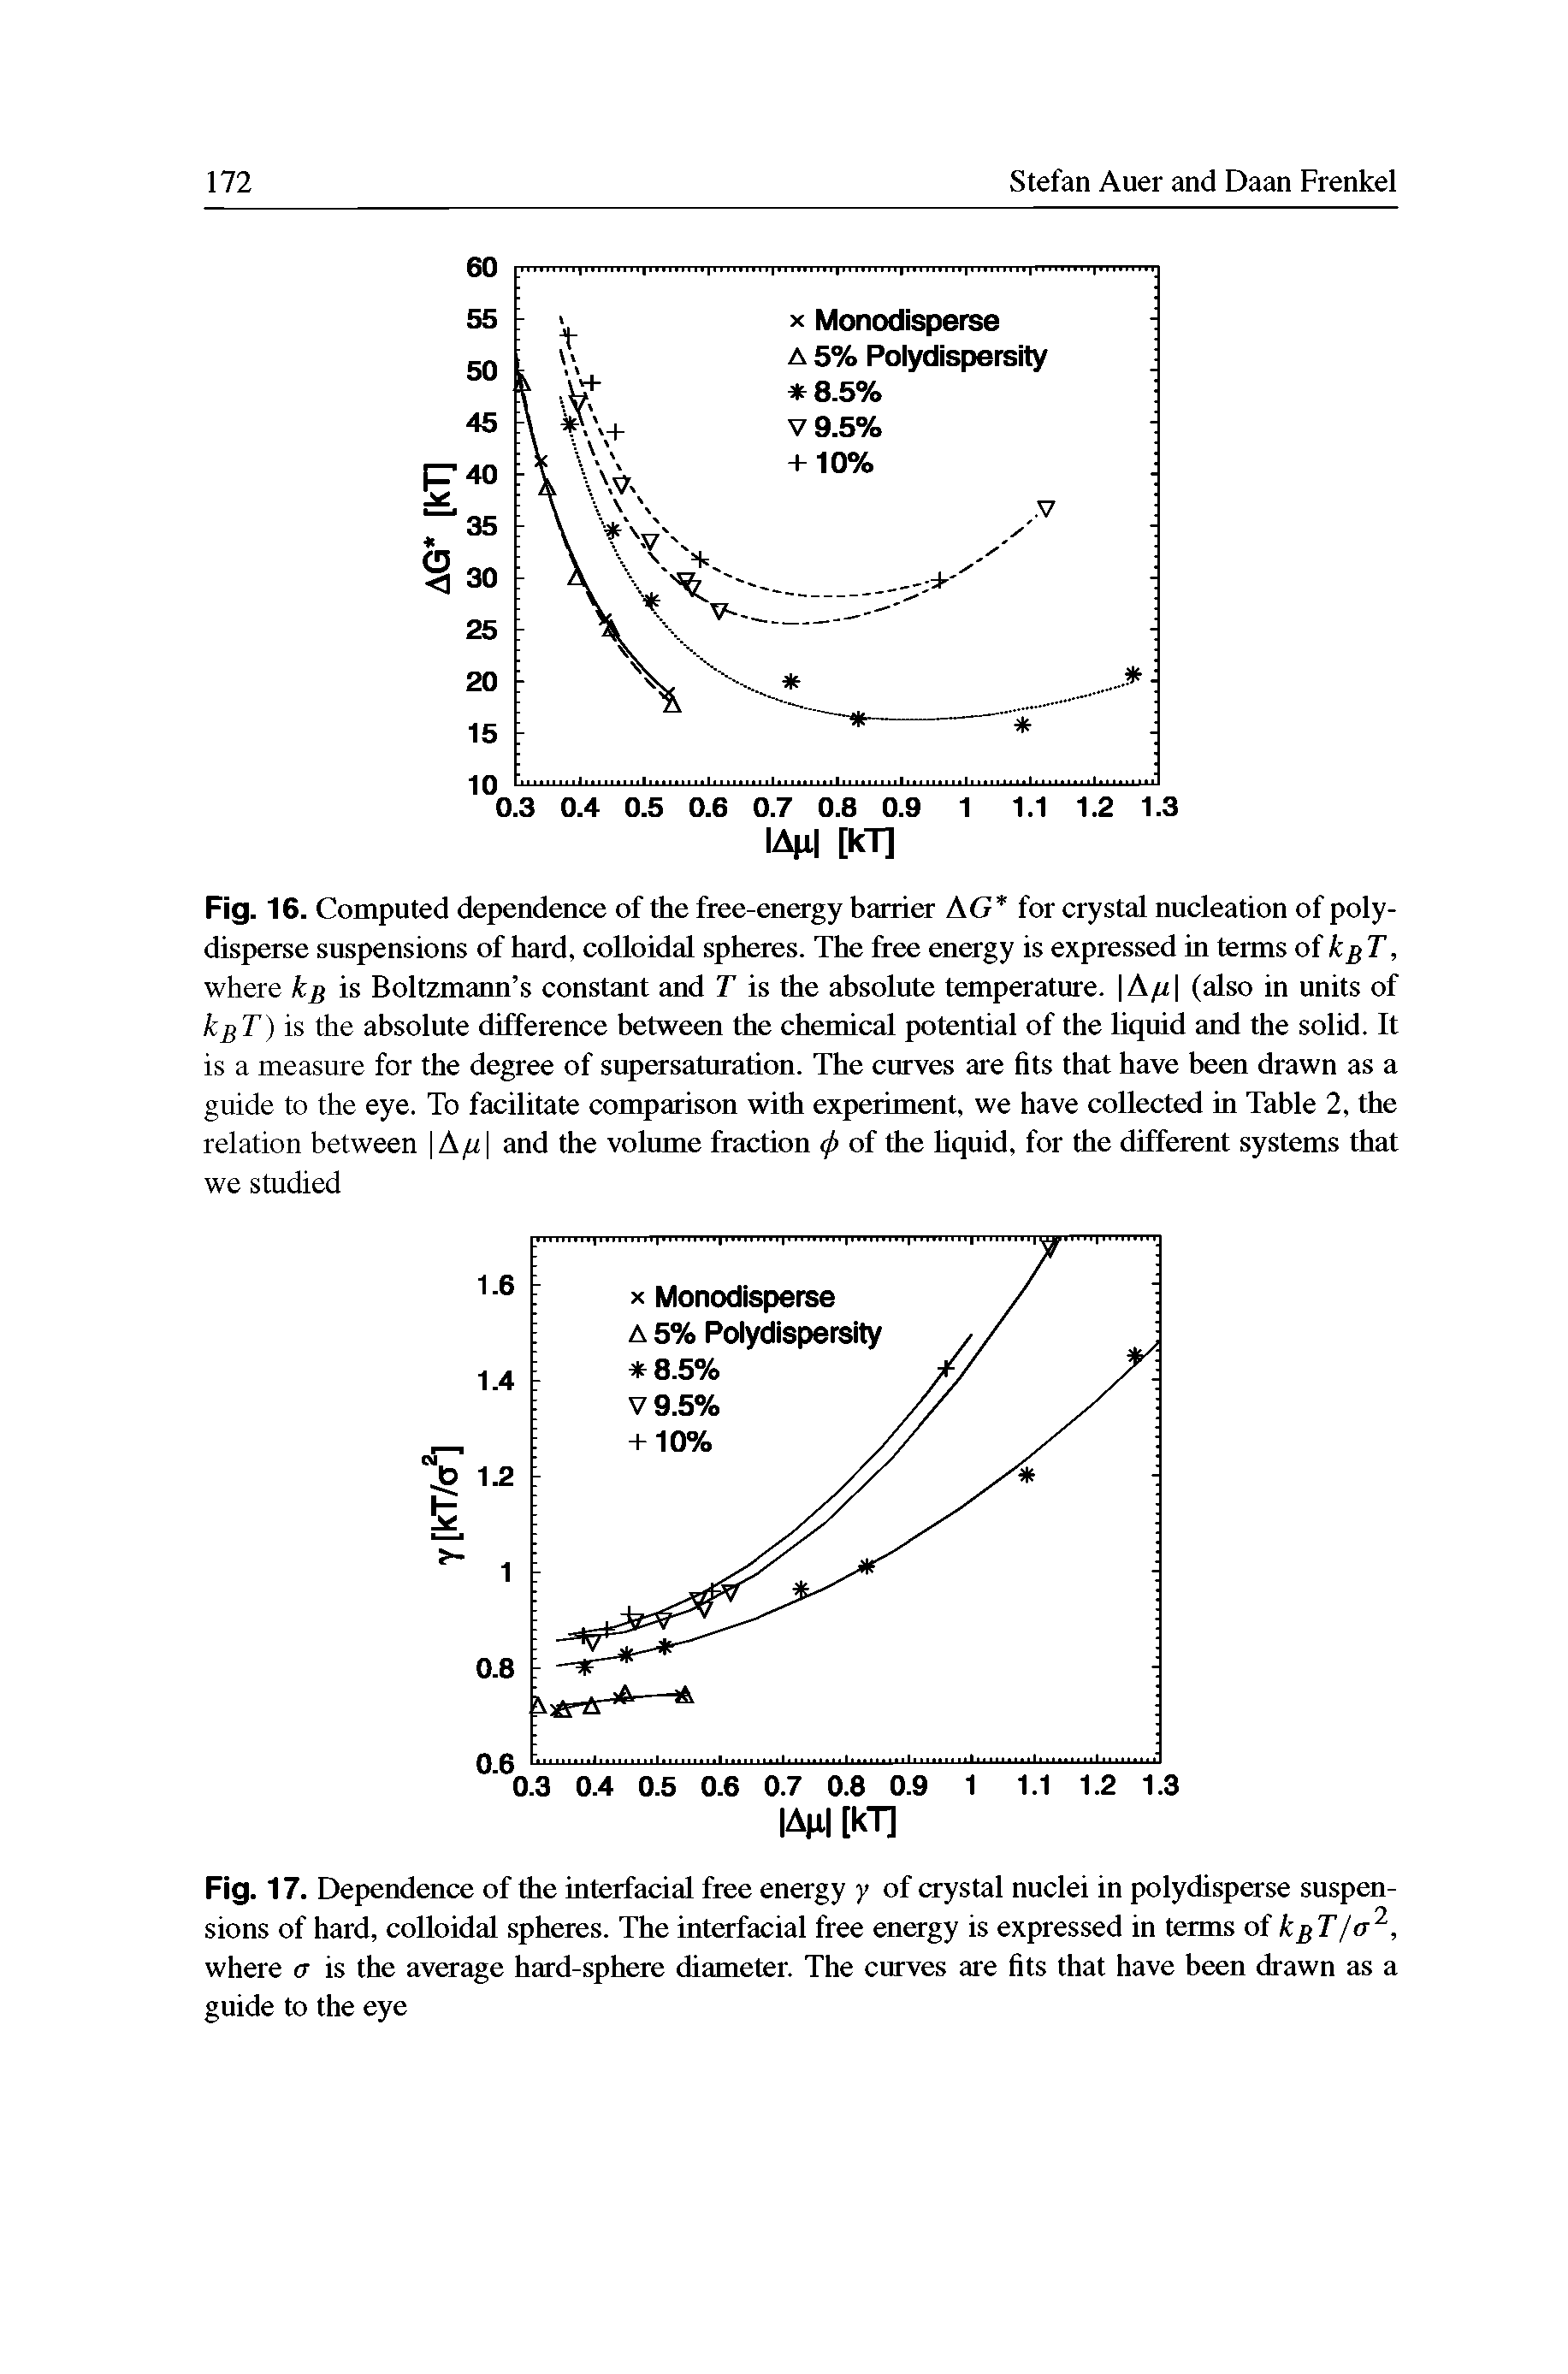 Fig. 16. Computed dependence of the free-energy barrier AG for crystal nucleation of poly-disperse suspensions of hard, colloidal spheres. The free energy is expressed in terms ofkgT, where is Boltzmann s constant and T is the absolute temperature. A/i (also in units of is the absolute difference between the chemical potential of the liquid and the solid. It is a measure for the degree of supersaturation. The curves are fits that have been drawn as a guide to the eye. To facilitate comparison with experiment, we have collected in Table 2, the relation between A,u and the volume fraction of the liquid, for the different systems that we studied...